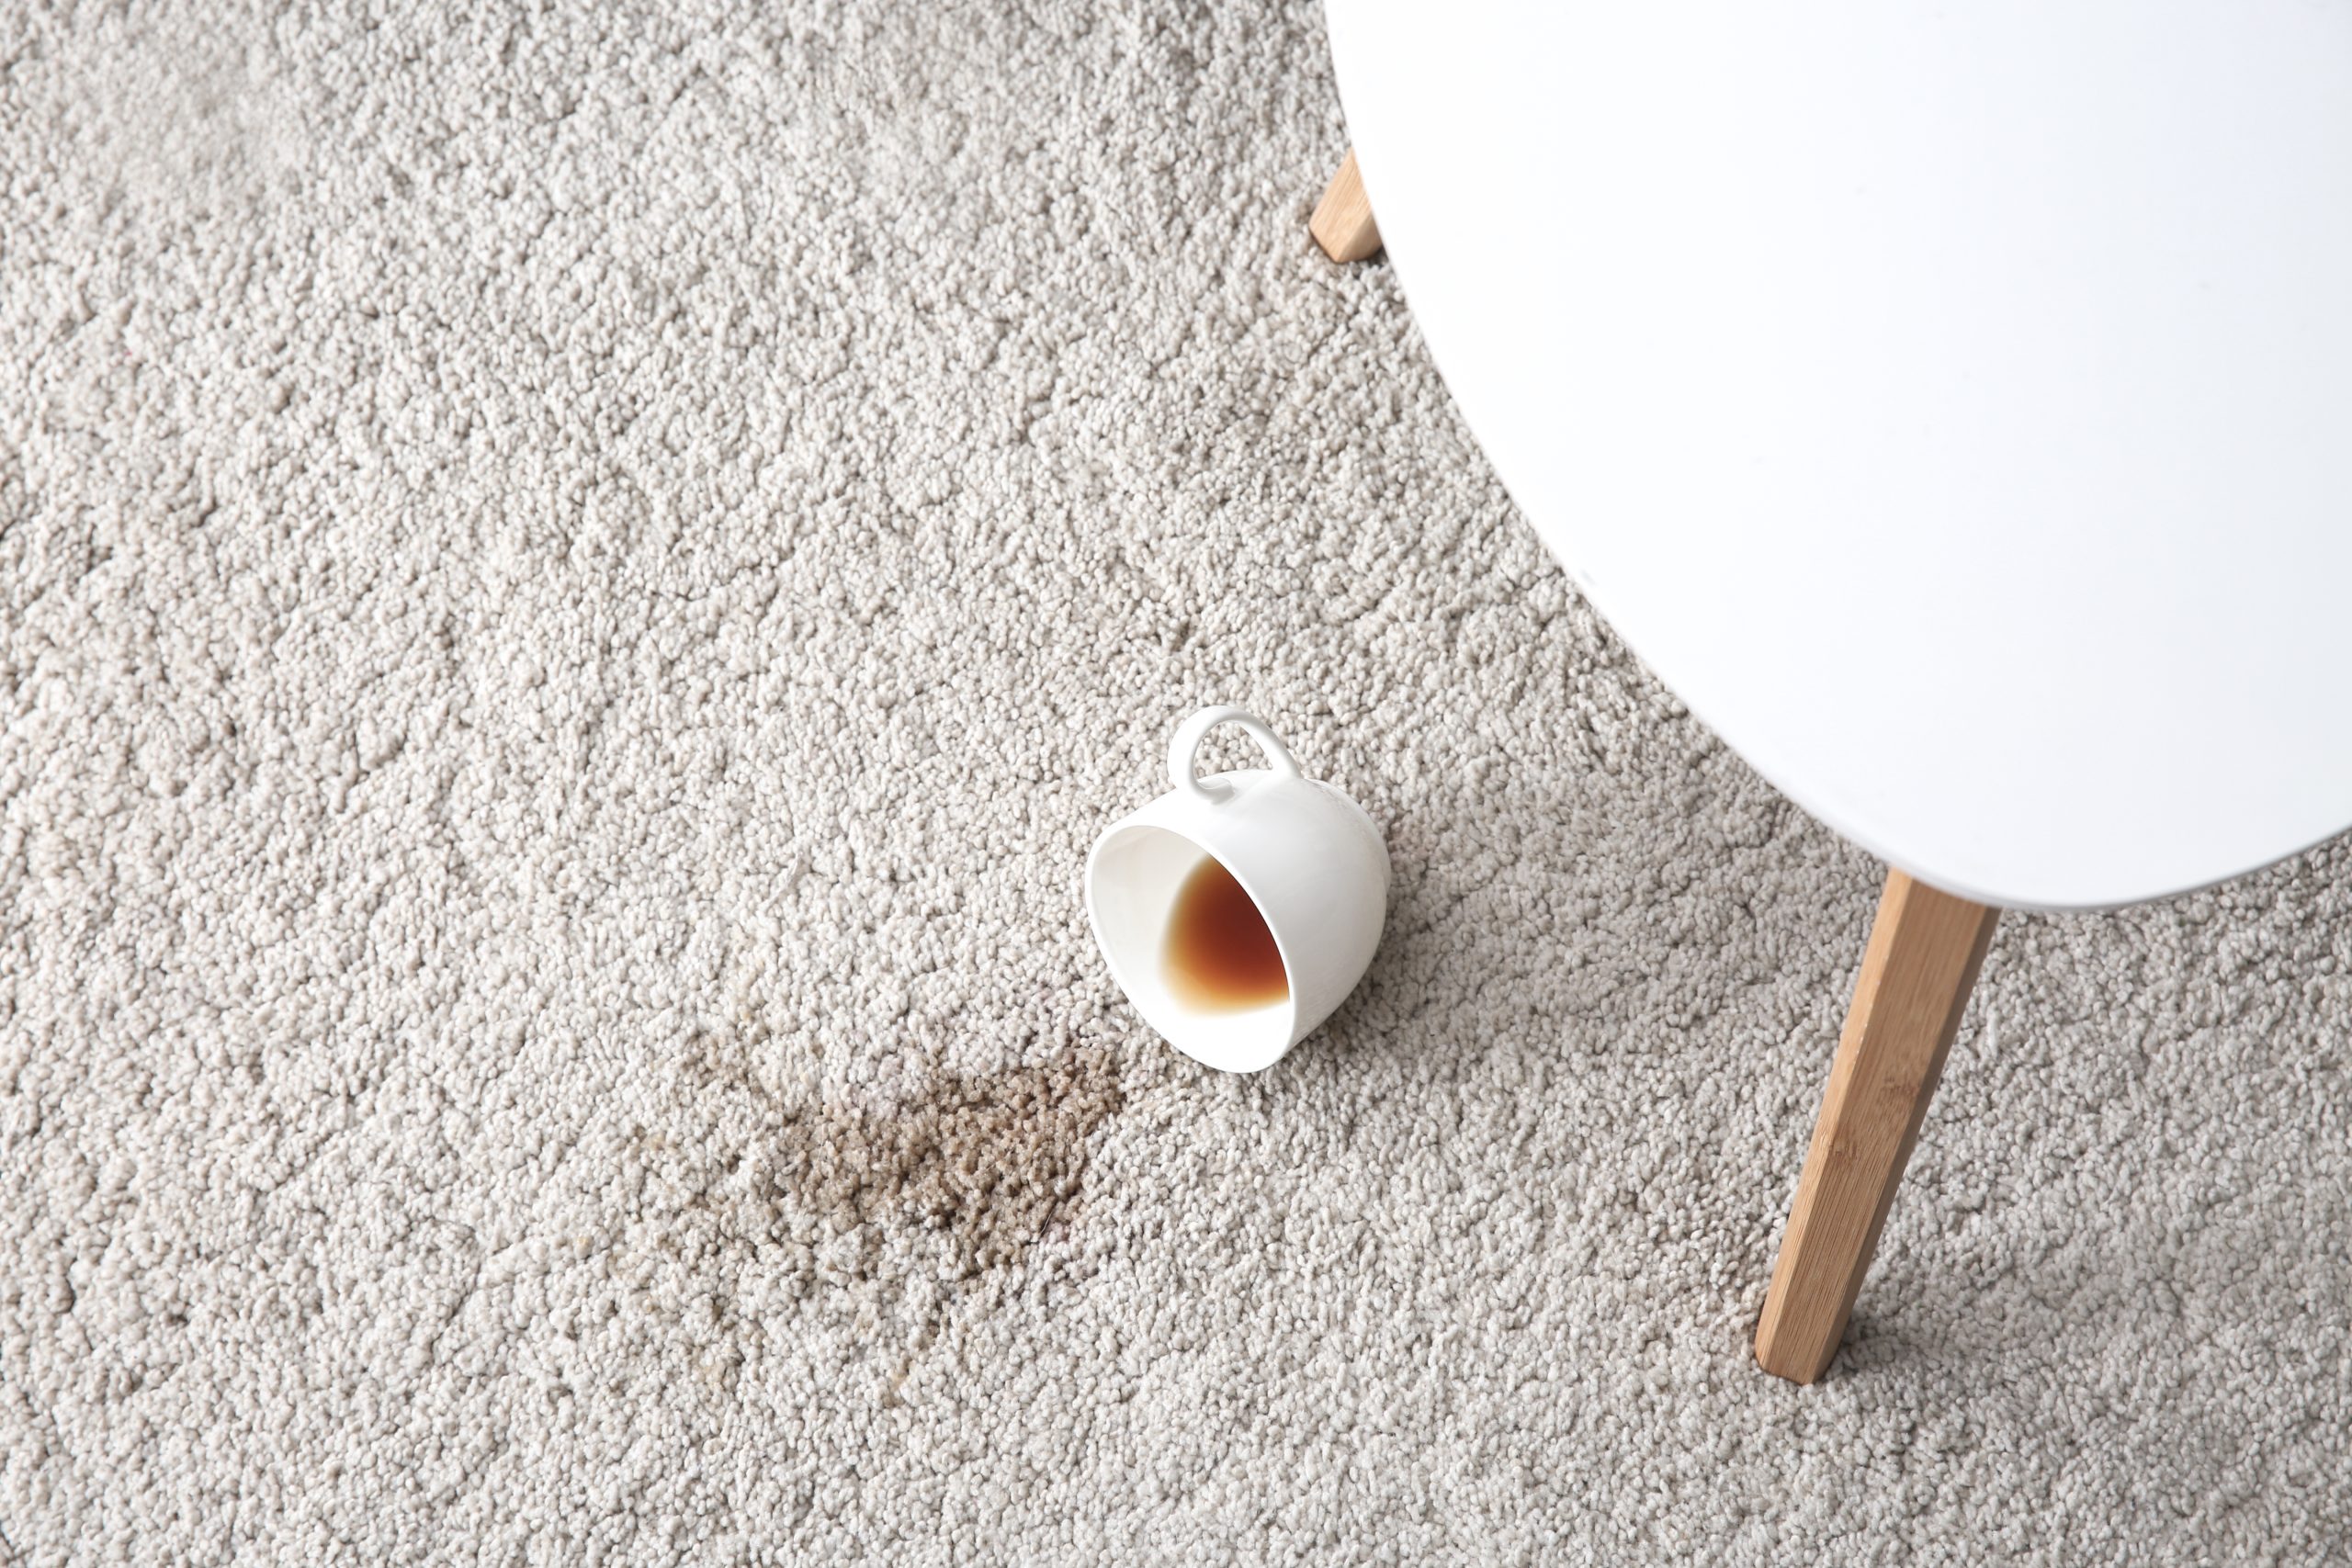 Cup,Of,Coffee,Spilled,On,Carpet